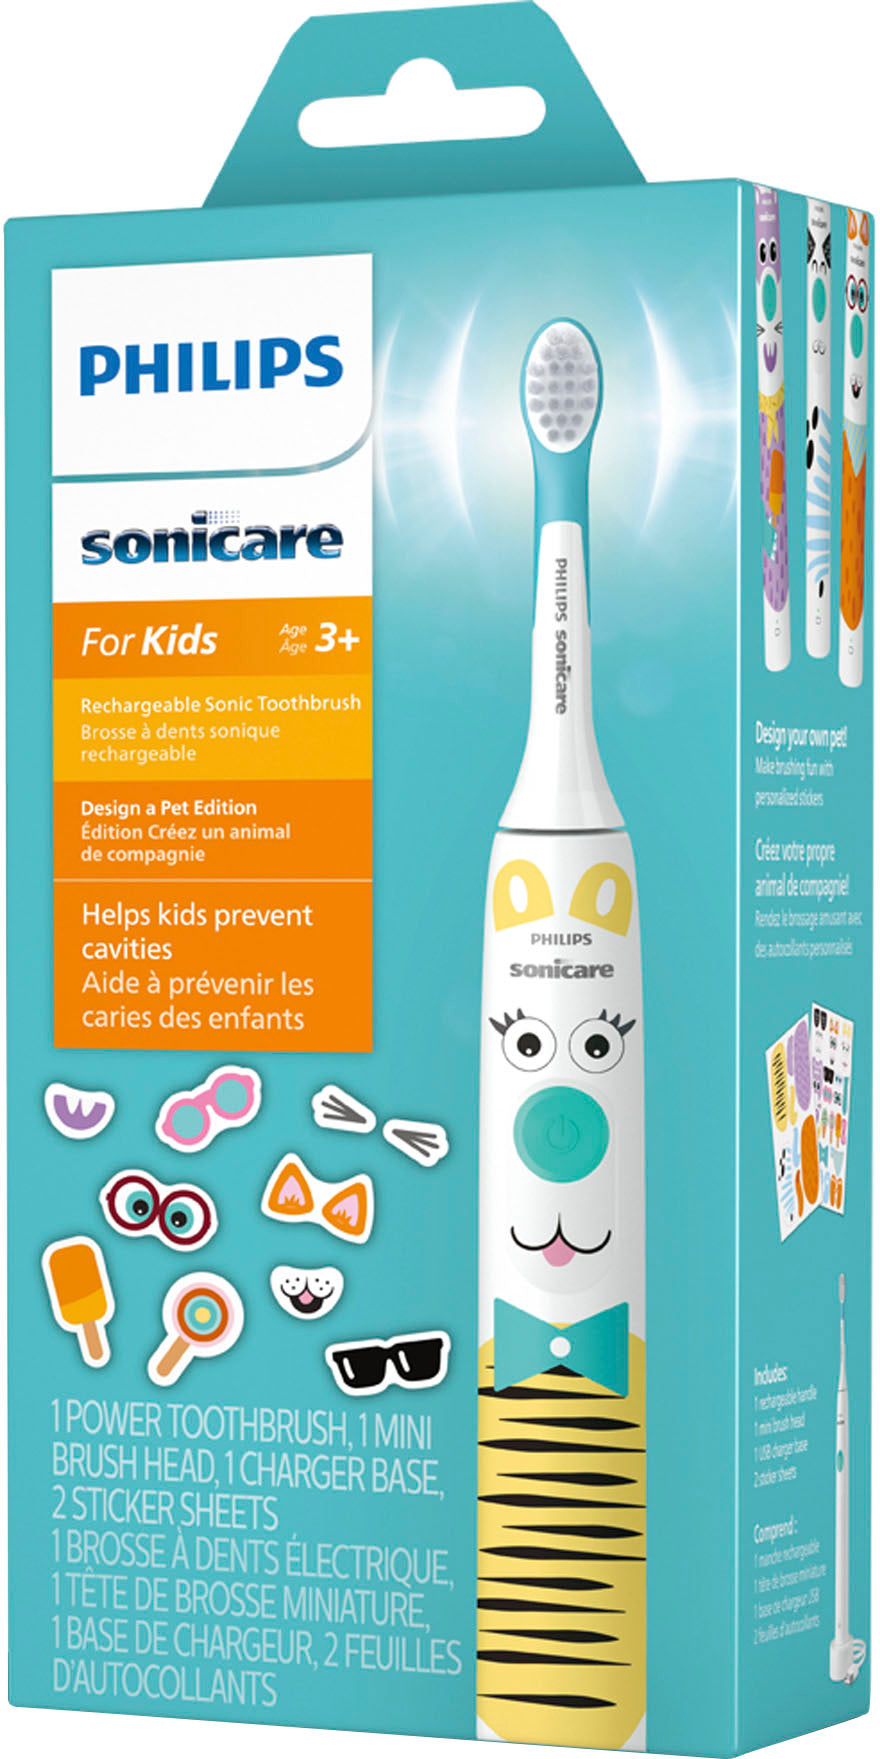 Philips Sonicare - Sonicare for Kids Design a Pet Edition Electric Toothbrush - White With Aqua Blue Button_3